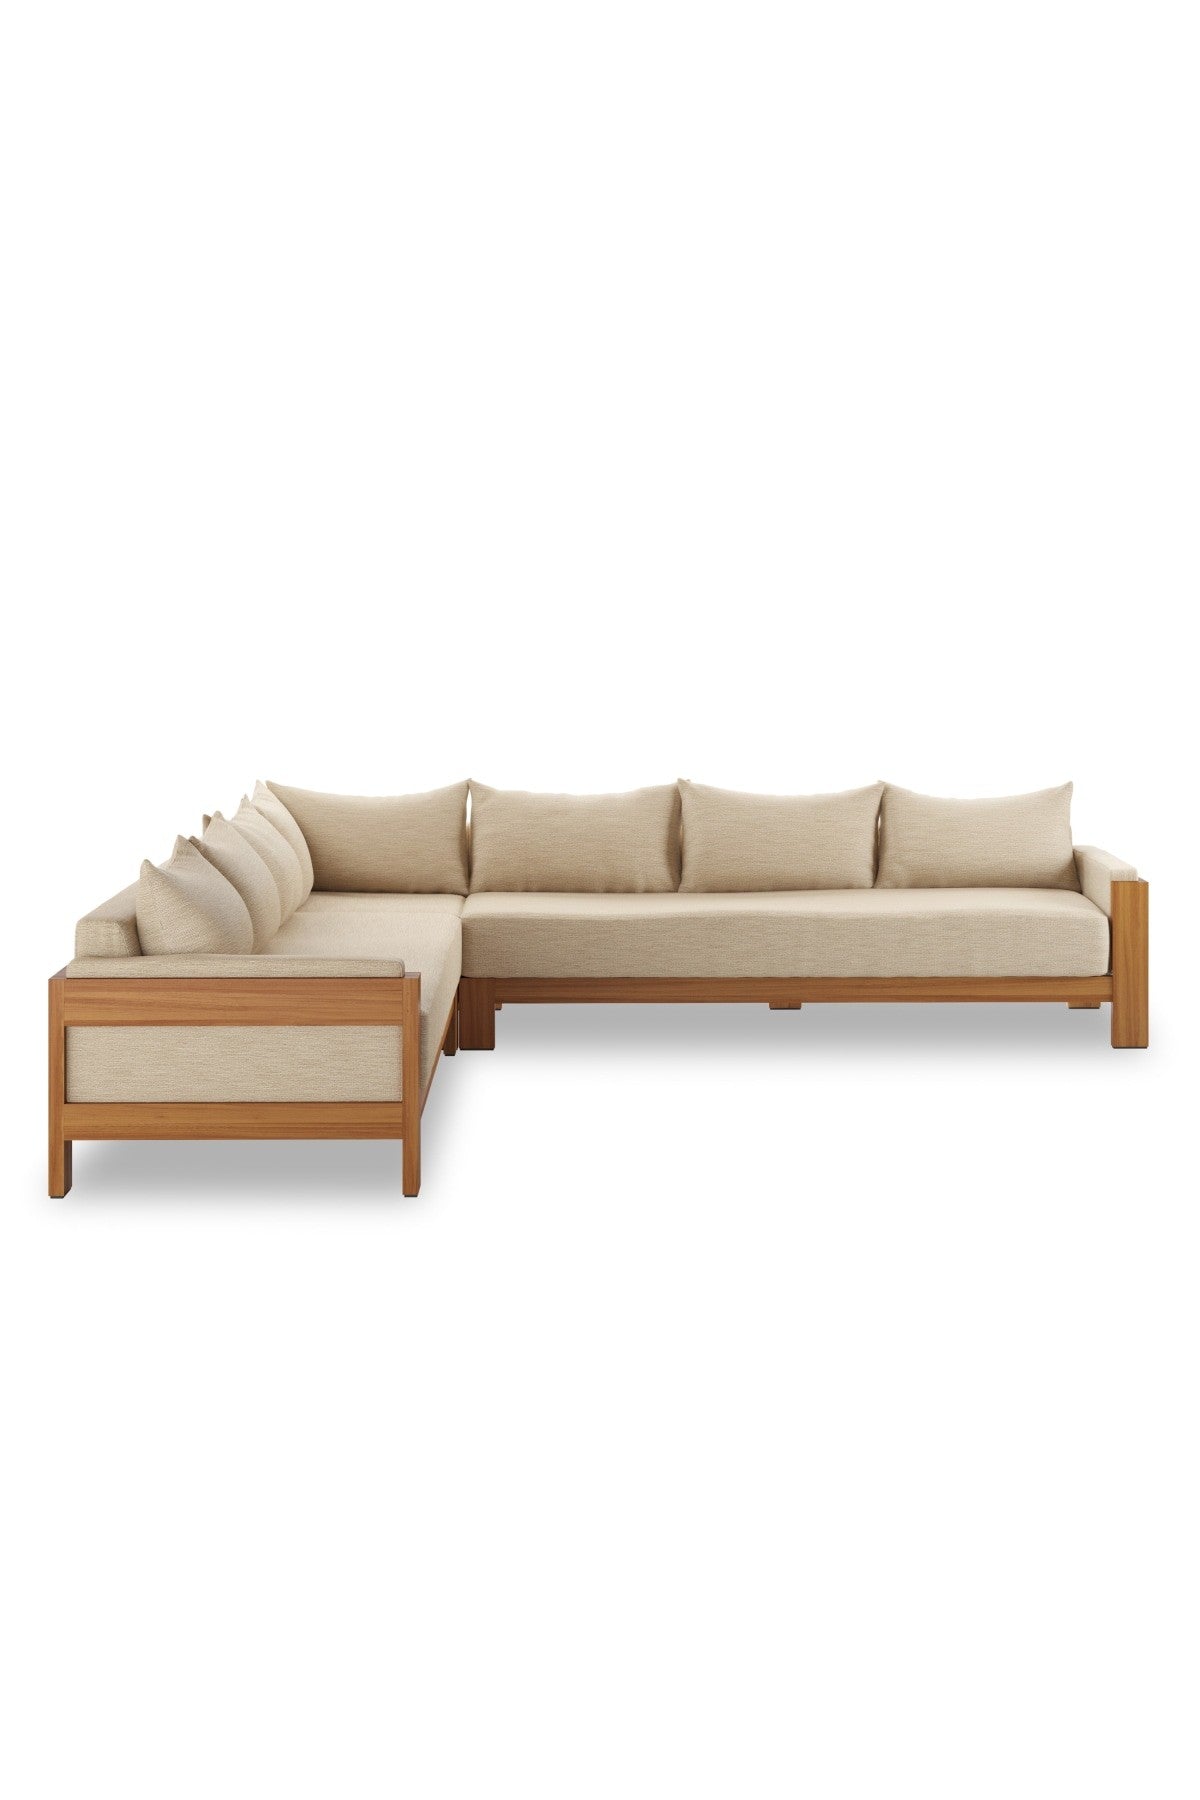 Chappy Outdoor Sectional